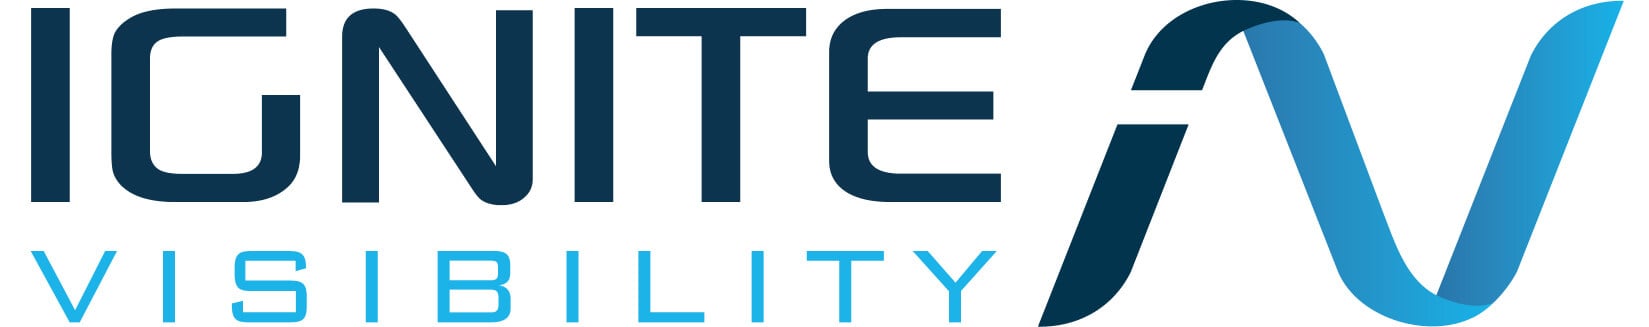 Best SD SEO Firm Logo: Ignite Visibility